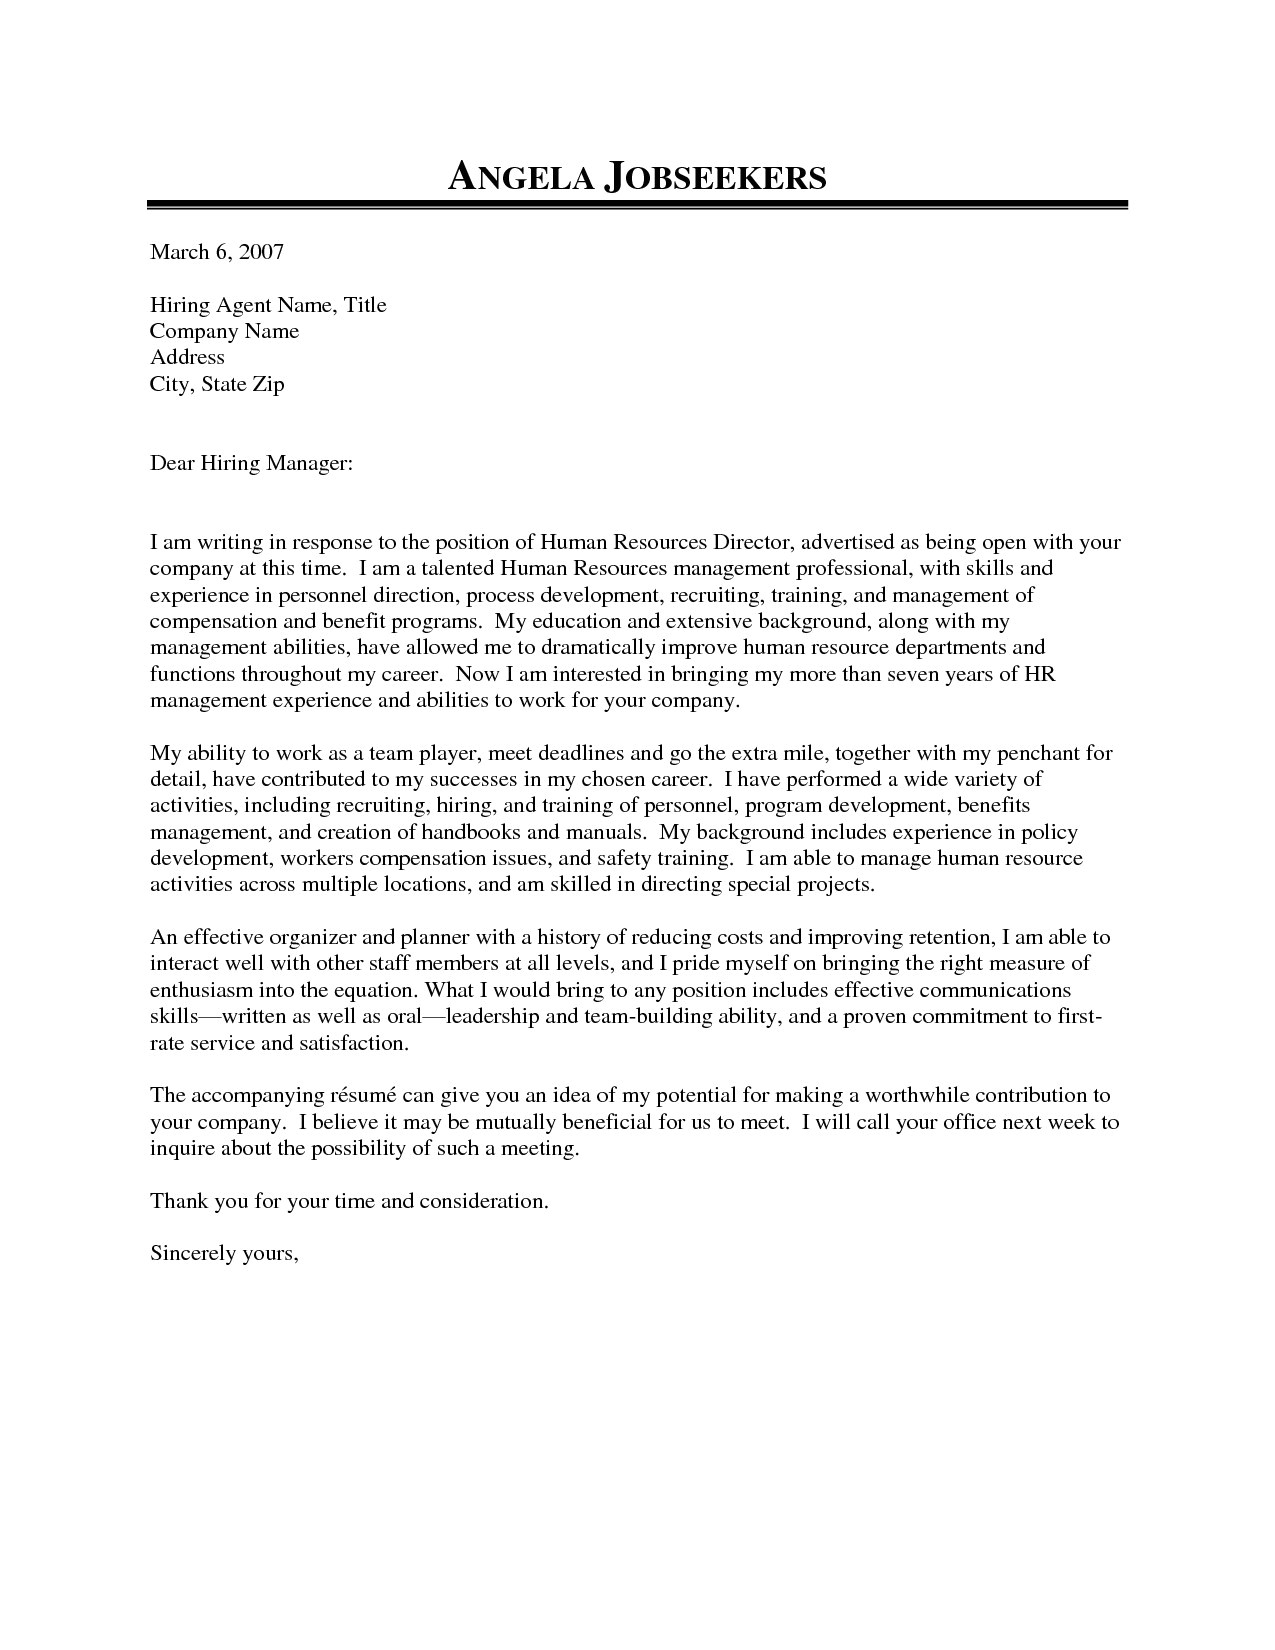 sample letter to human resources